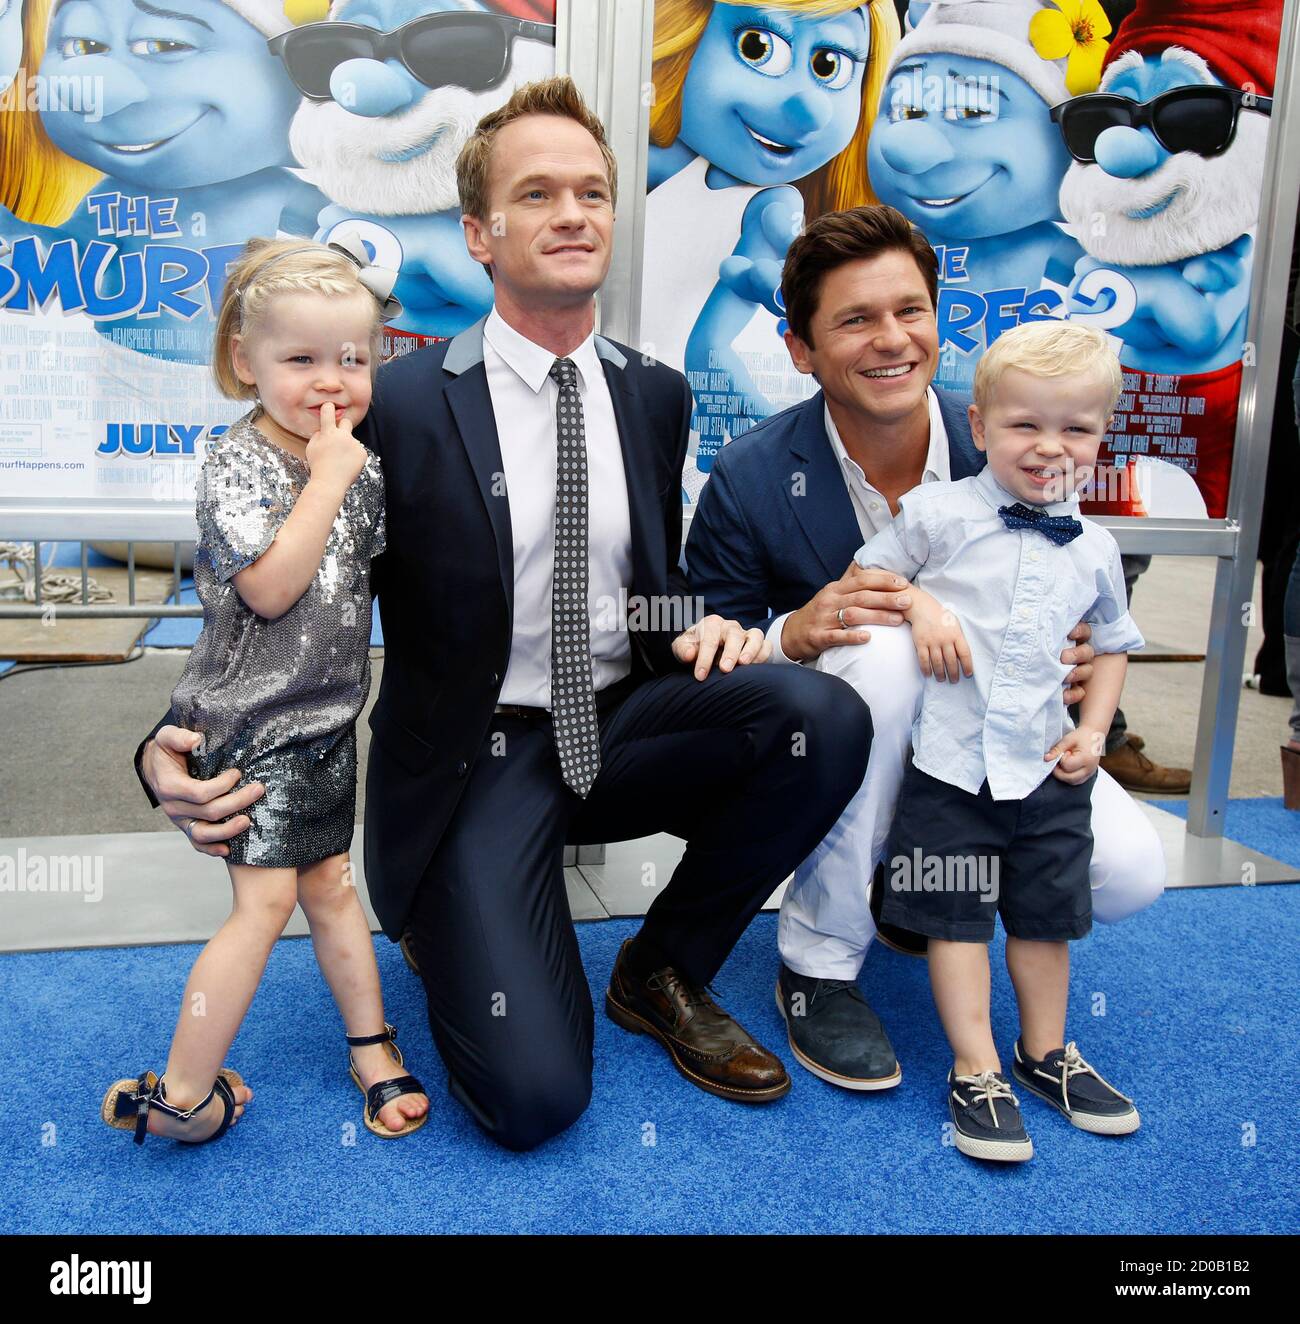 Cast member Neil Patrick Harris (L) and his partner David Burtka pose with  their twins Gideon Scott and Harper Grace, at the premiere of the film "The  Smurfs 2" at the Regency